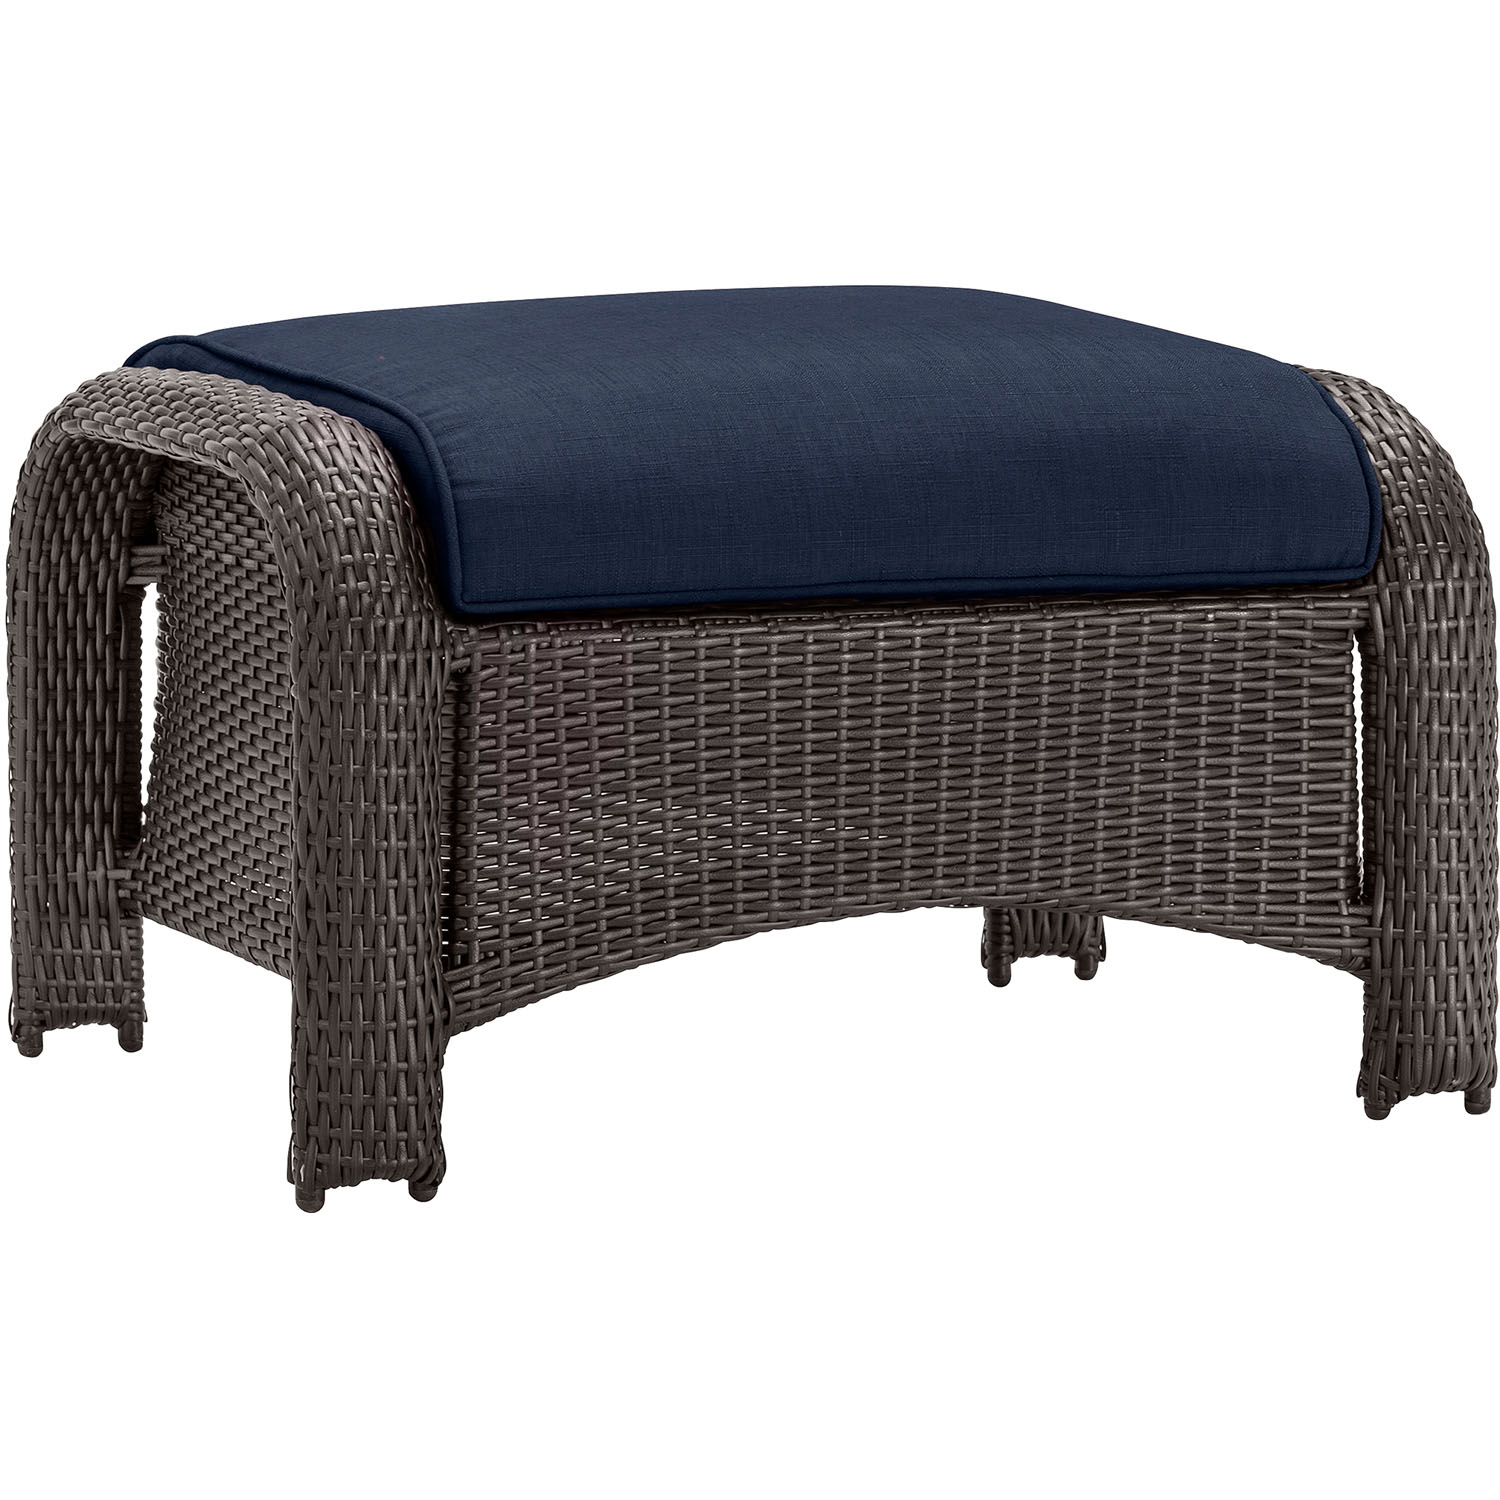 Hanover Strathmere 6-Piece Wicker and Steel Outdoor Conversation Set, Navy Blue - image 5 of 15